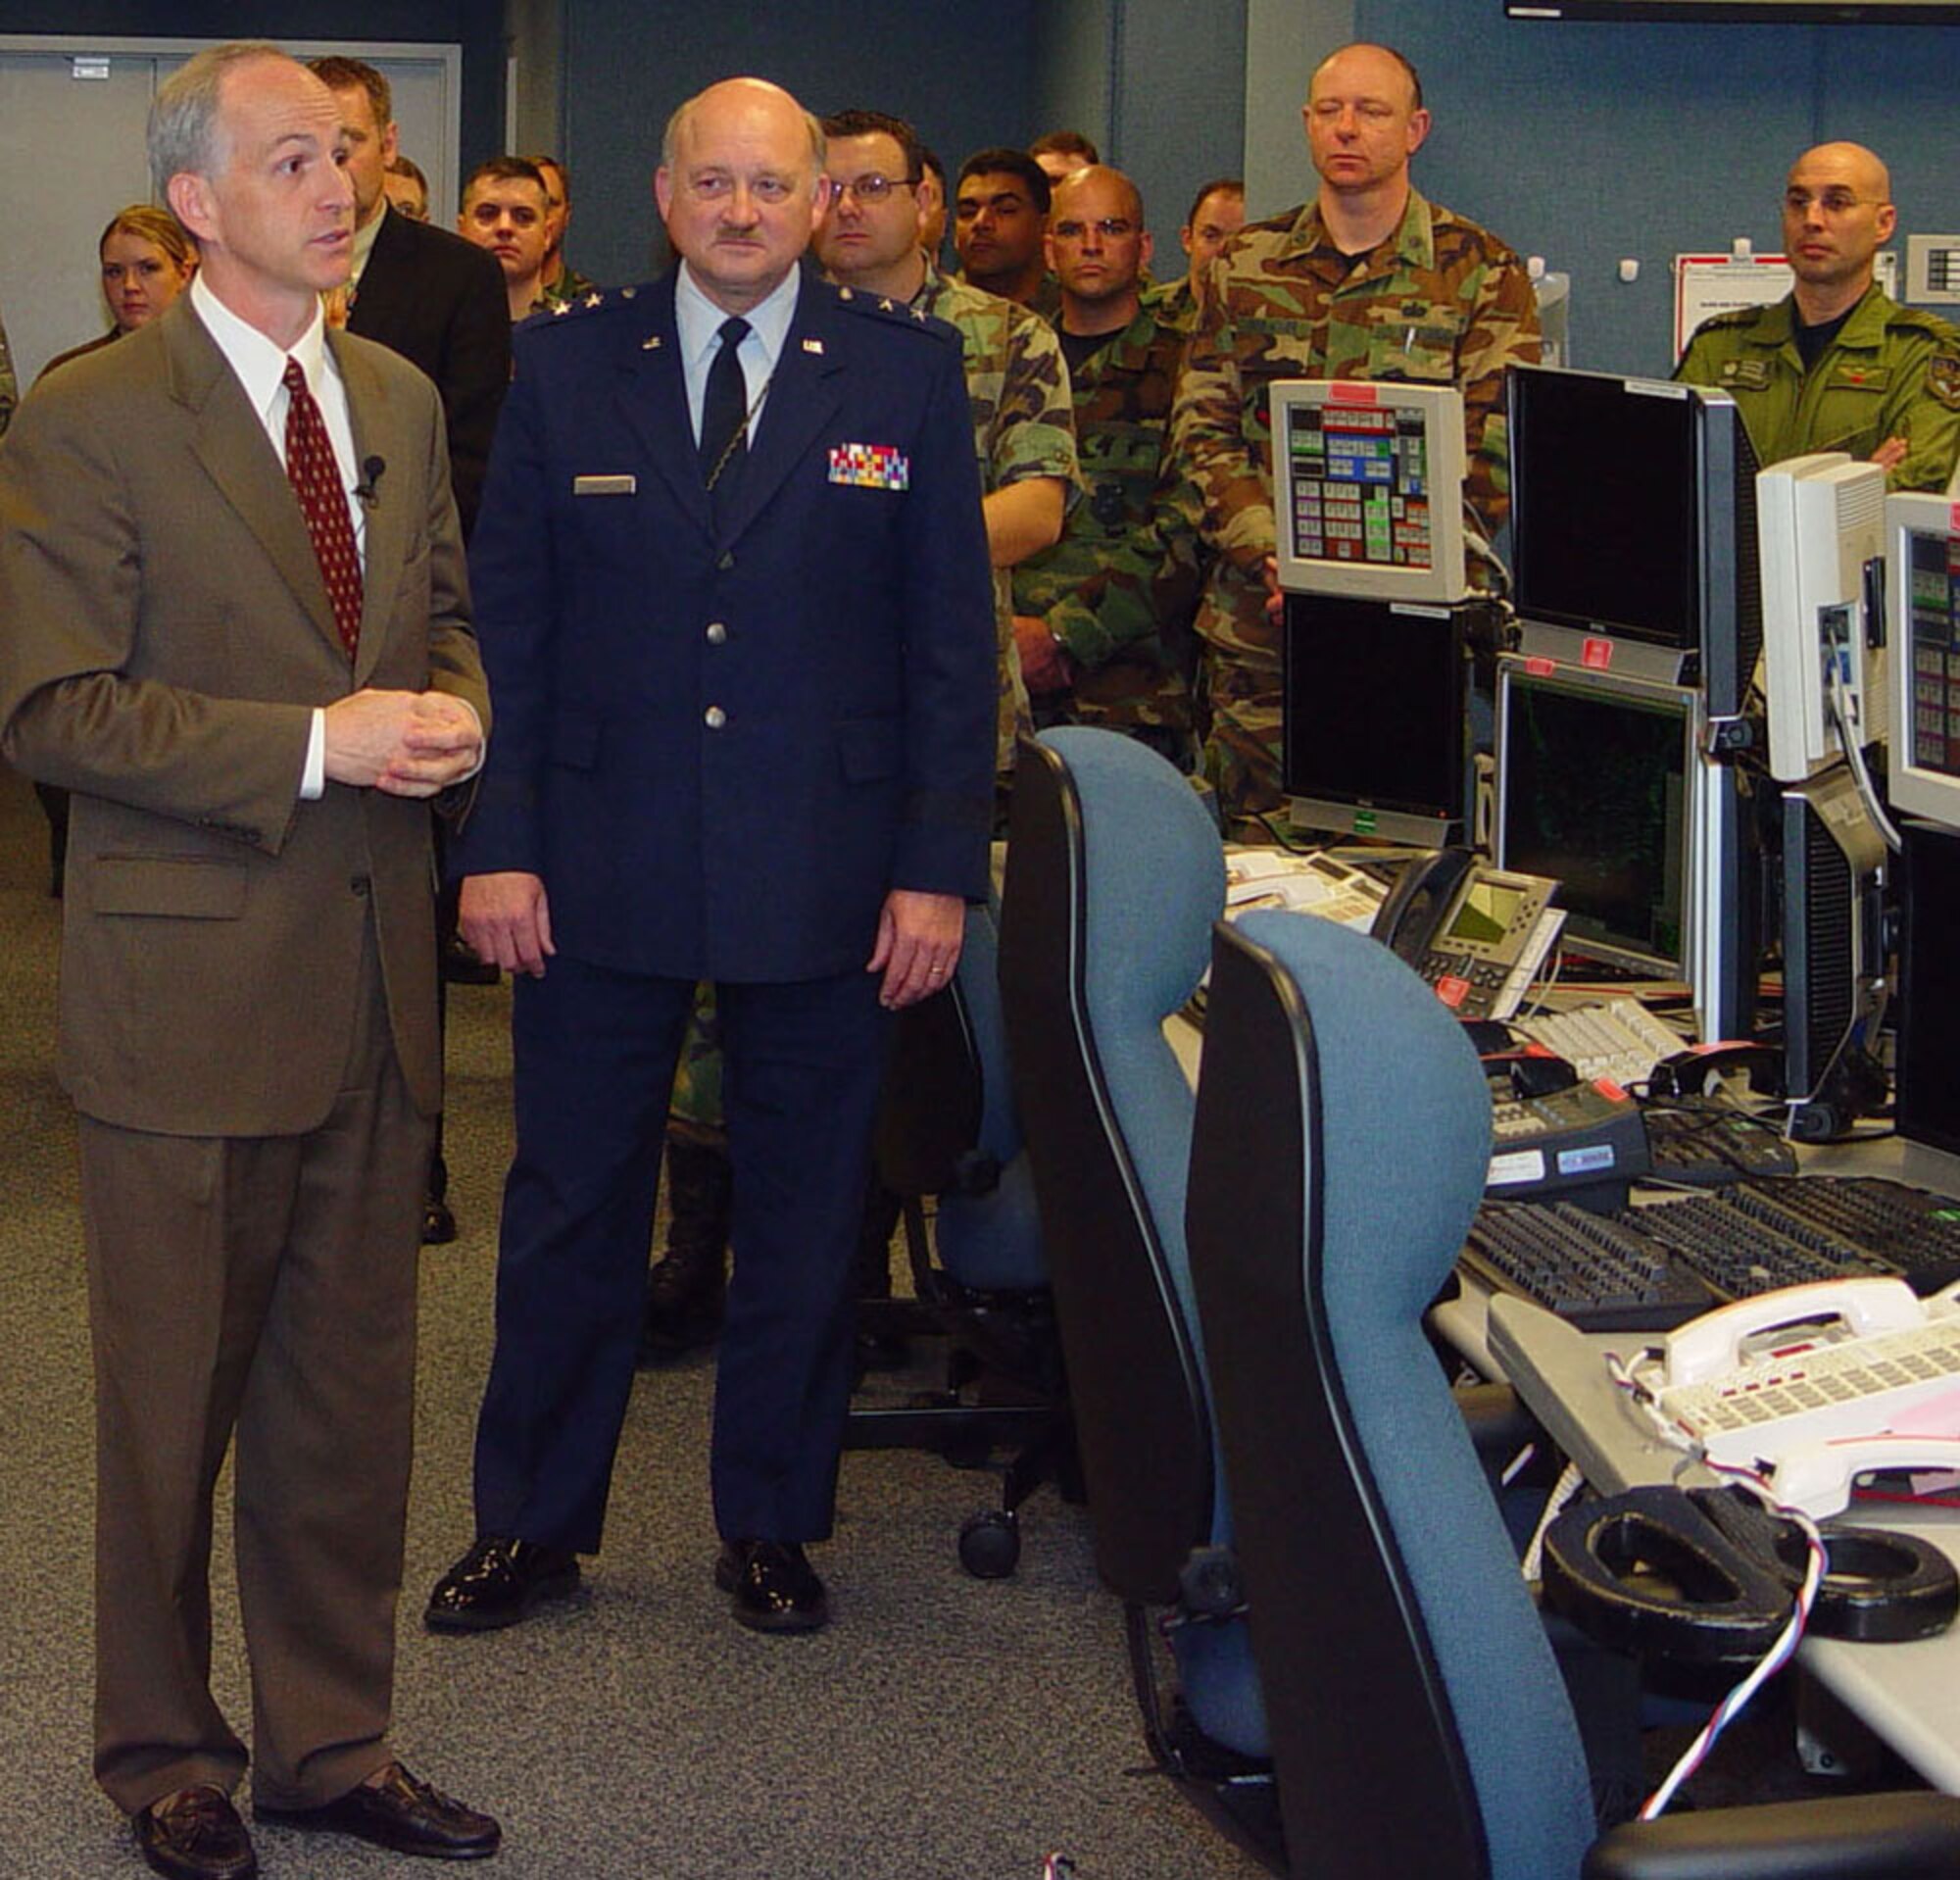 Representative Adam Smith (left) and Maj. Gen. Timothy J. Lowenberg preside at the grand opening of the Western Air Defense Sector?s state-of-the-art operations floor Nov. 20.  The ceremony culminated an 18-month effort that now stands WADS as a significant, technically-advanced deterrent against asymmetrical threats over a significant portion of America?s airspace.  Congressman Smith represents Washington State?s 9th District; General Lowenberg is Washington State?s adjutant general.  (U.S. Air Force photo/Randy Rubattino)